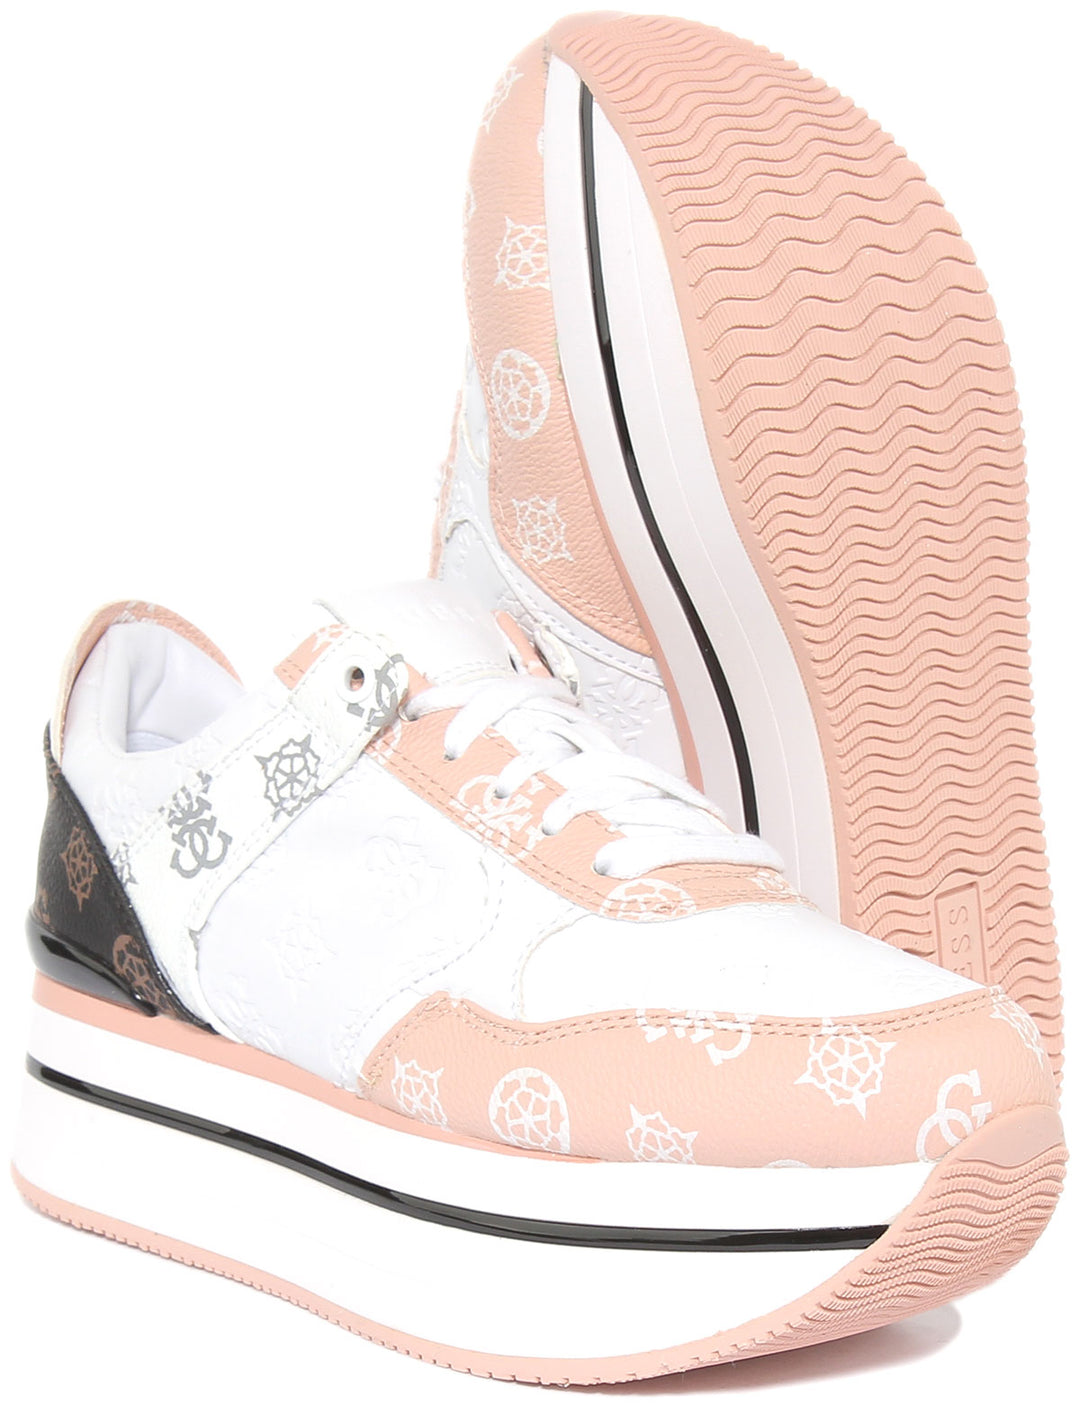 Guess Hindle 4G Platform In White Pink For Women